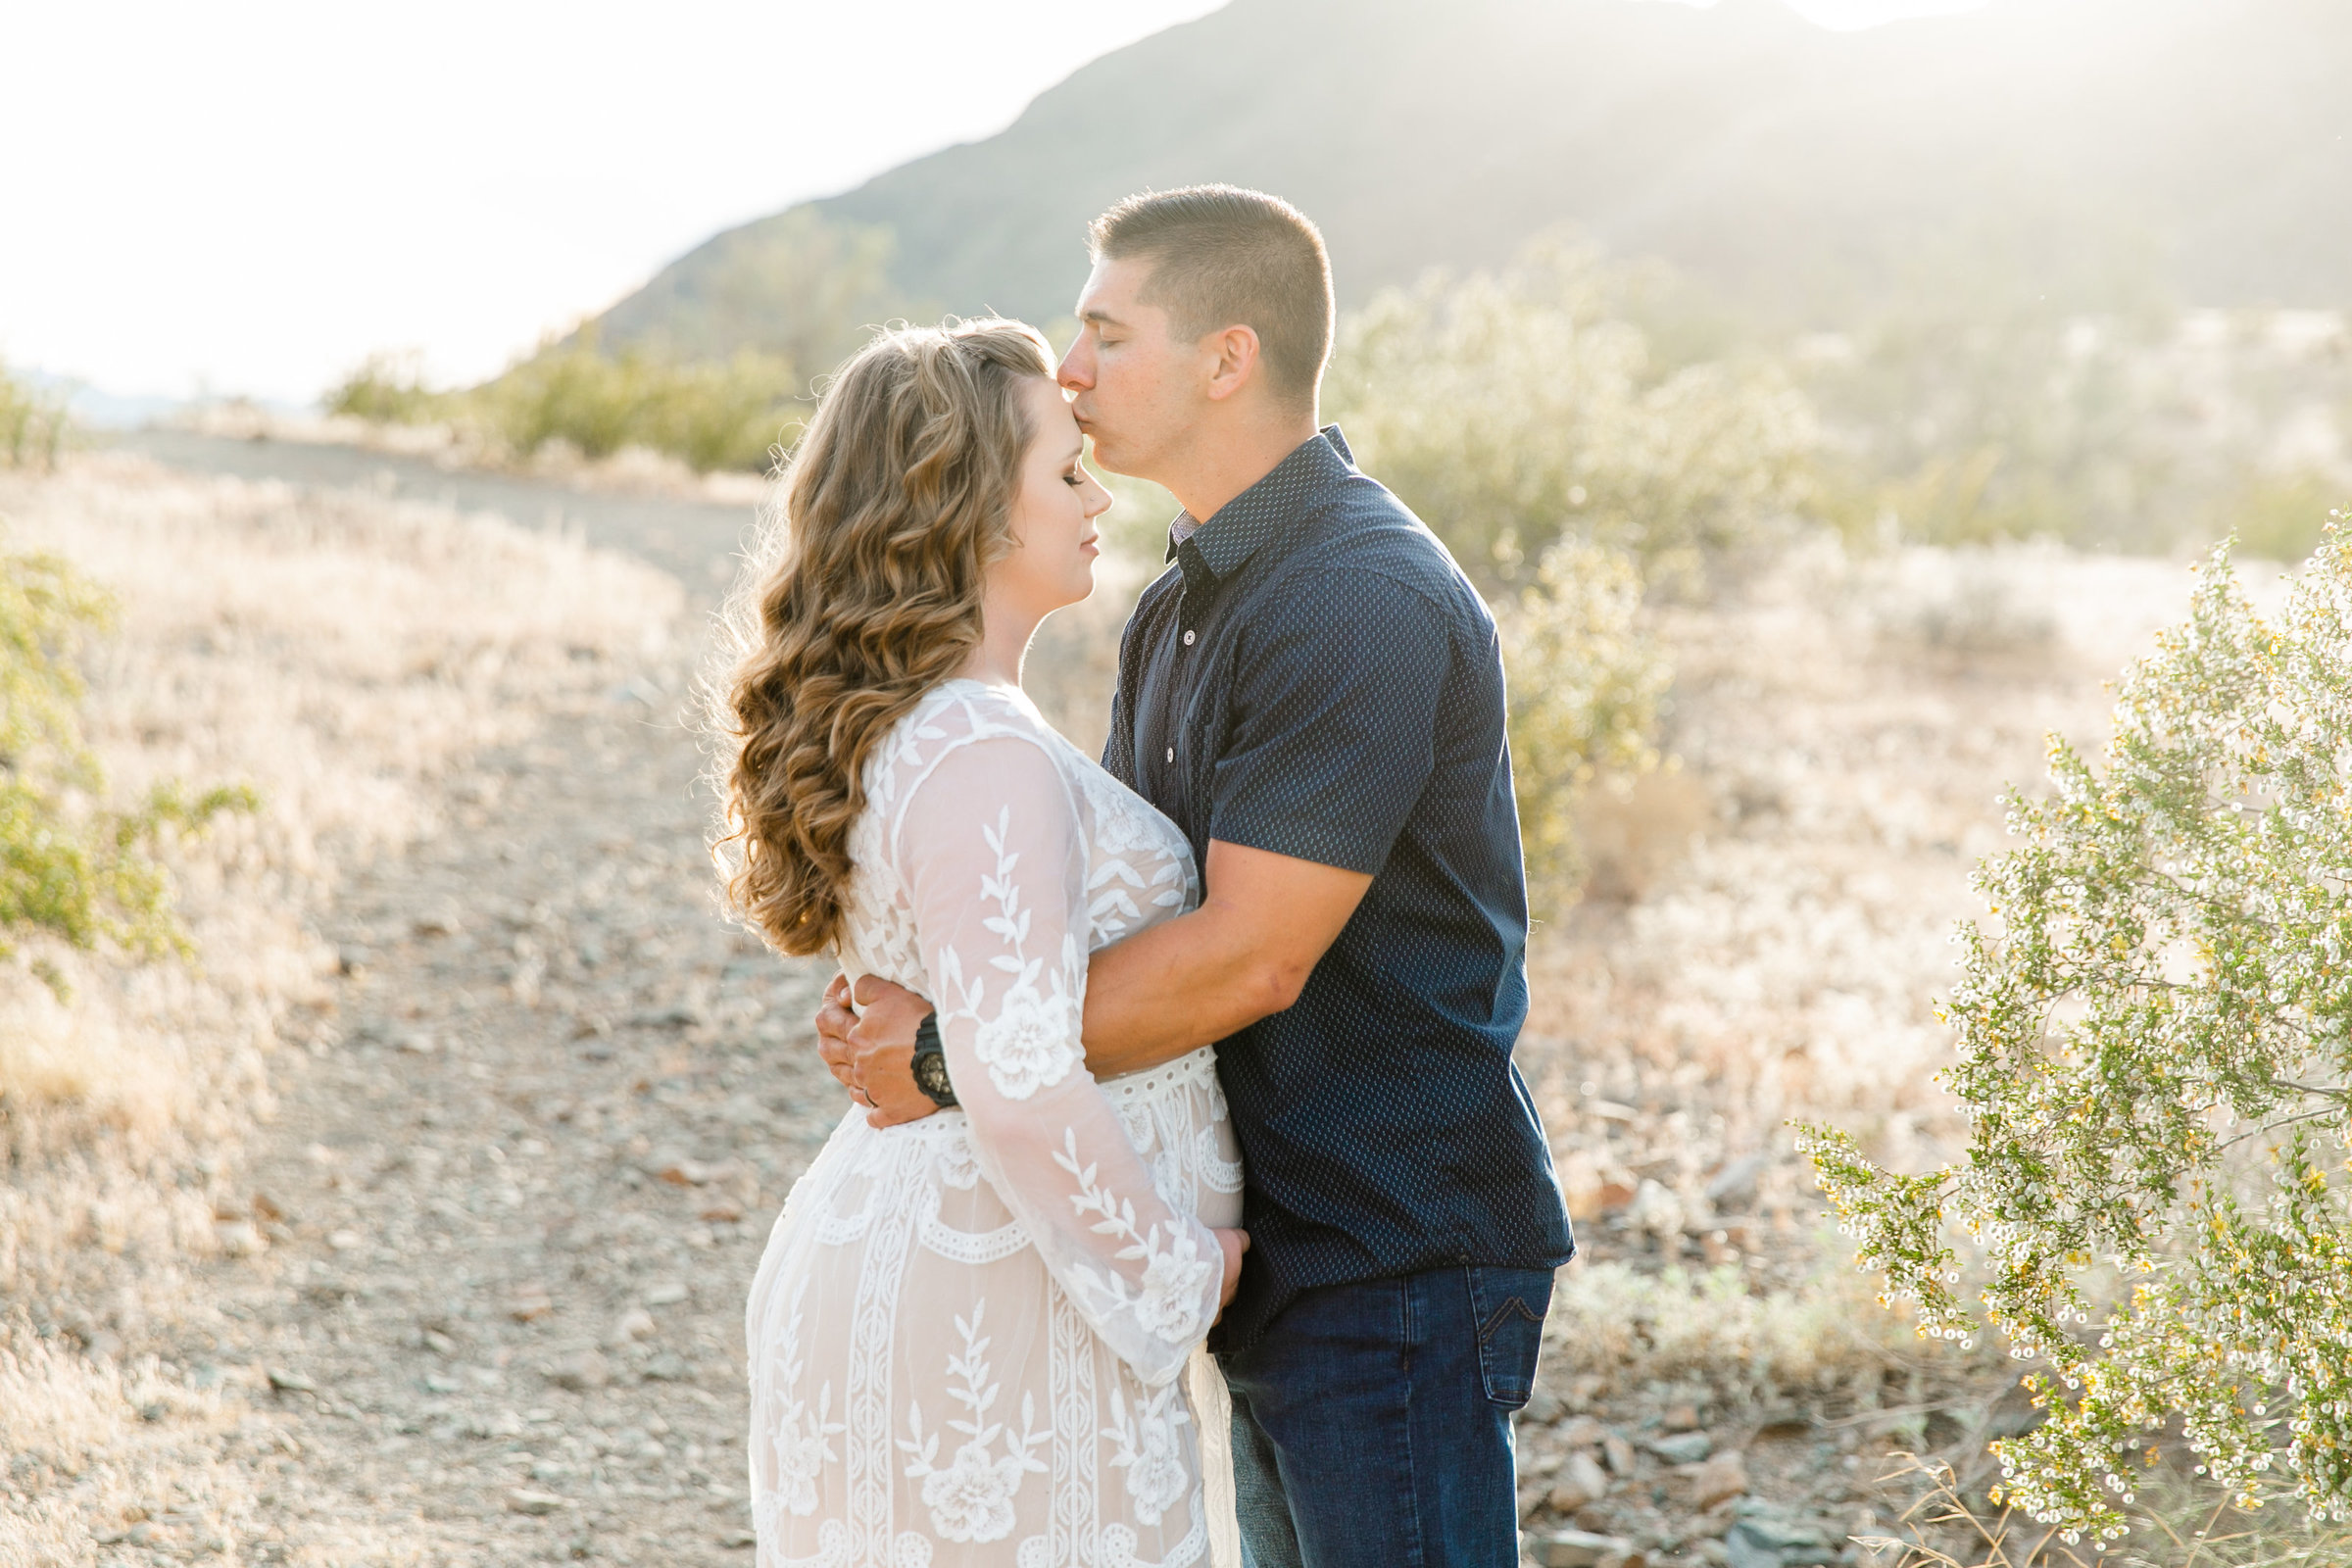 Karlie Colleen Photography - Arizona Maternity Photography - Brittany & Kyle-144